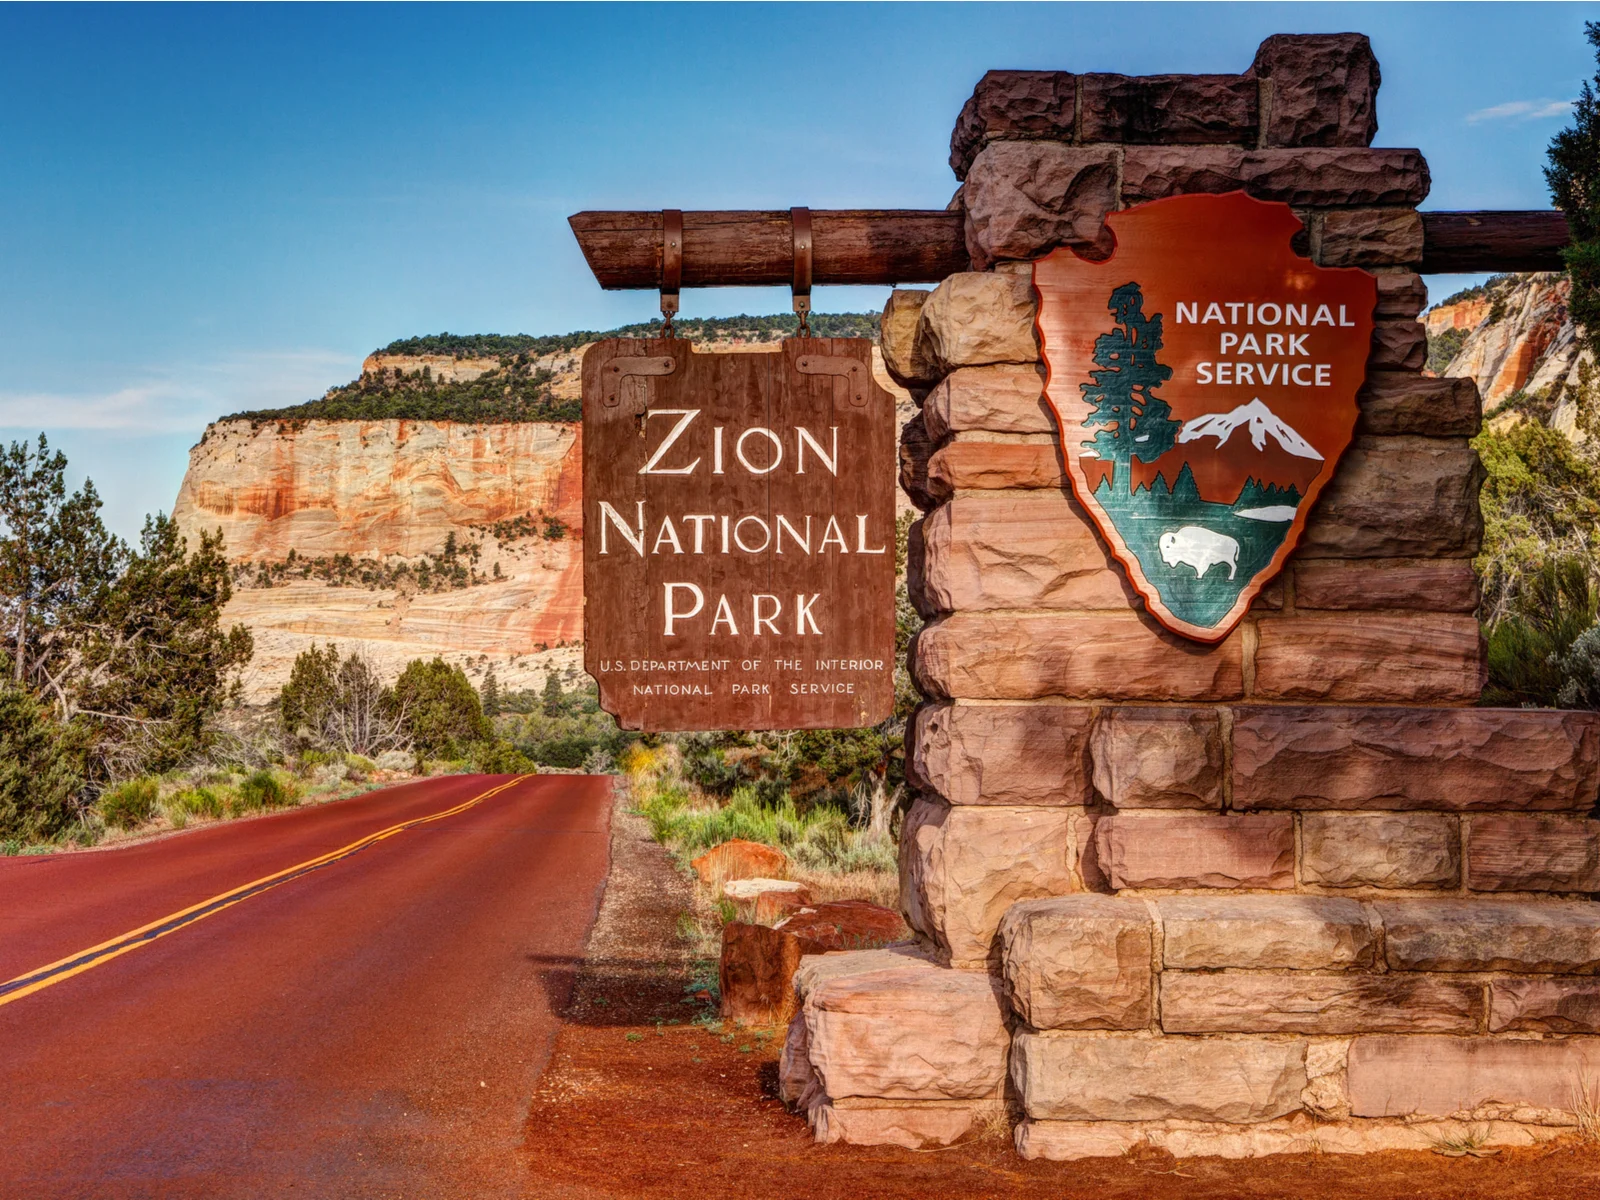 Entrance to the park as seen on a dirt road during the best time to visit Zion